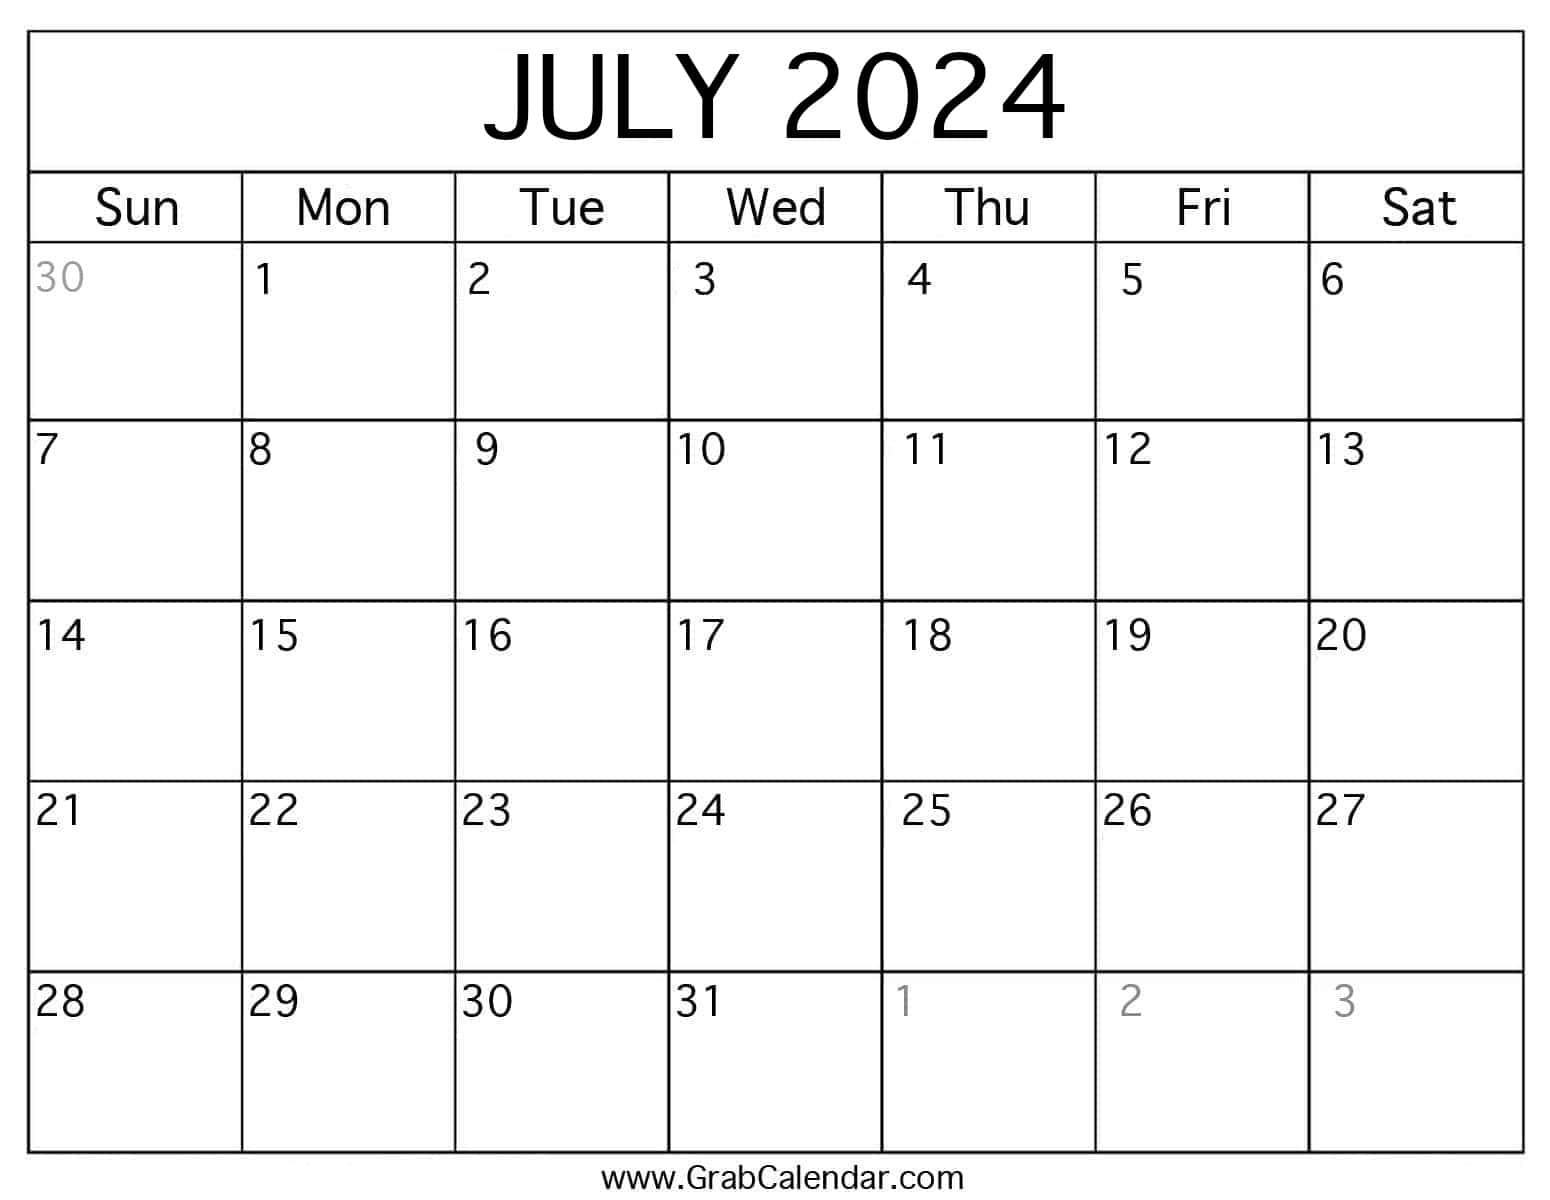 Printable July 2024 Calendar pertaining to July Calendar Important Dates 2024